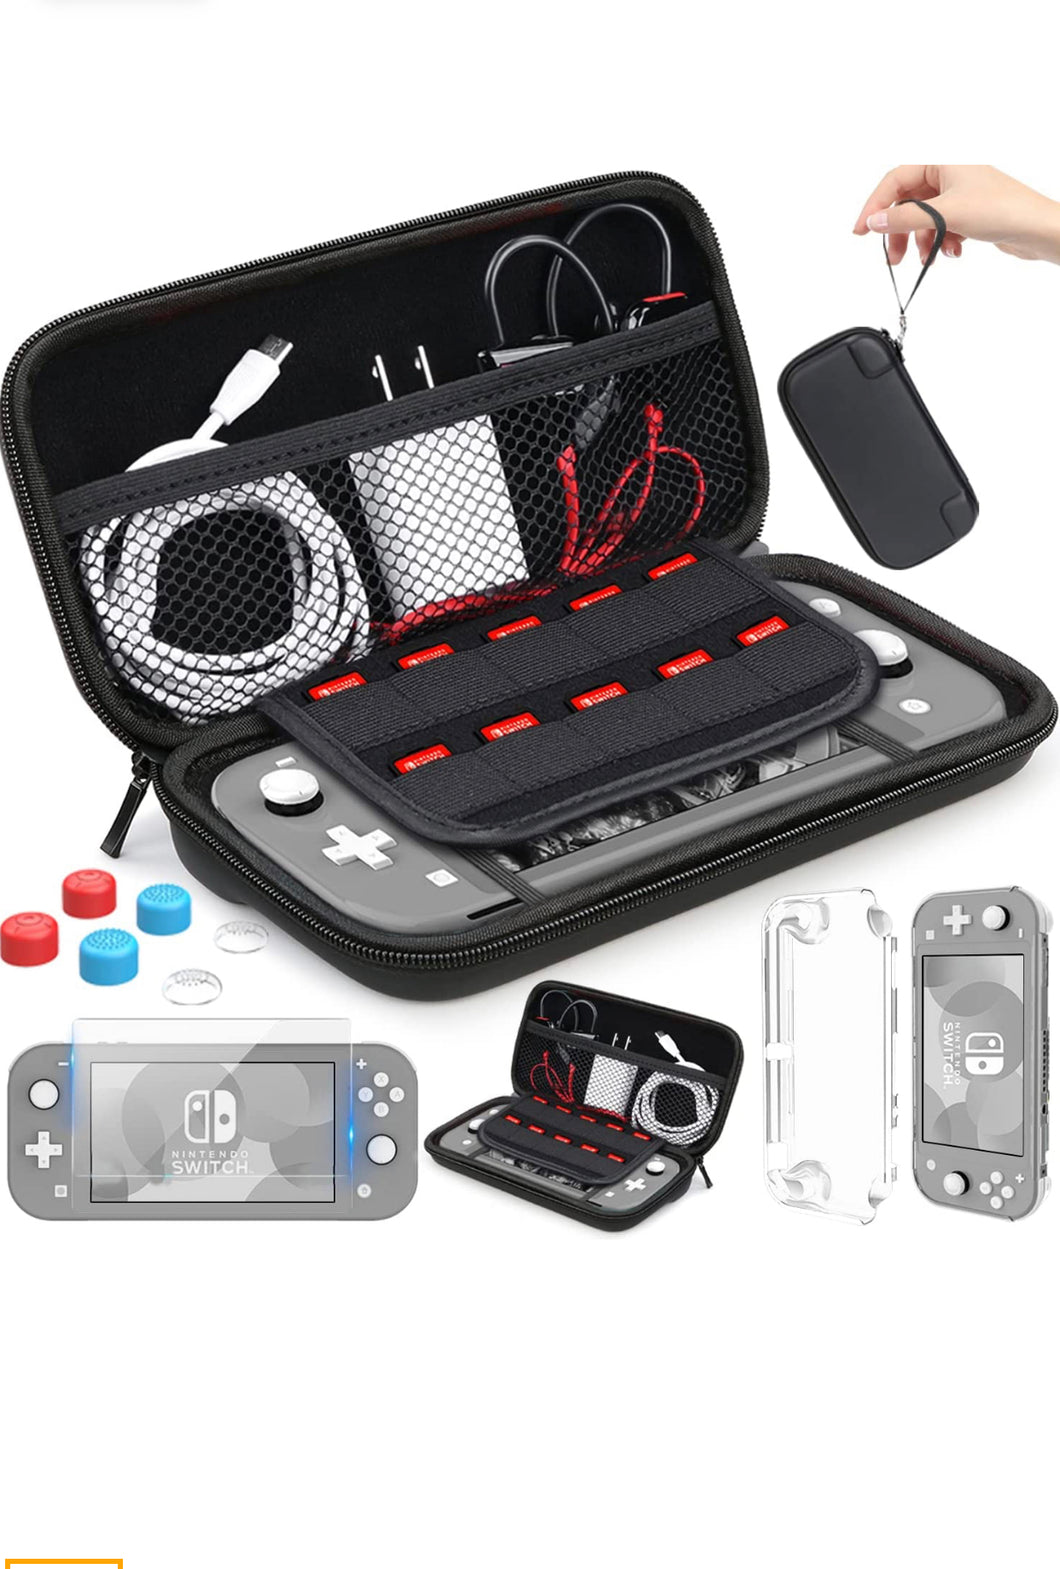 Compatible with Nintendo Switch Lite Carrying Case, Mini Switch Lite Cover Case + Tempered Glass Screen Protector + Games Card + 6 Thumb Grip Caps Compatible with Nintendo Switch Lite Accessories Kit